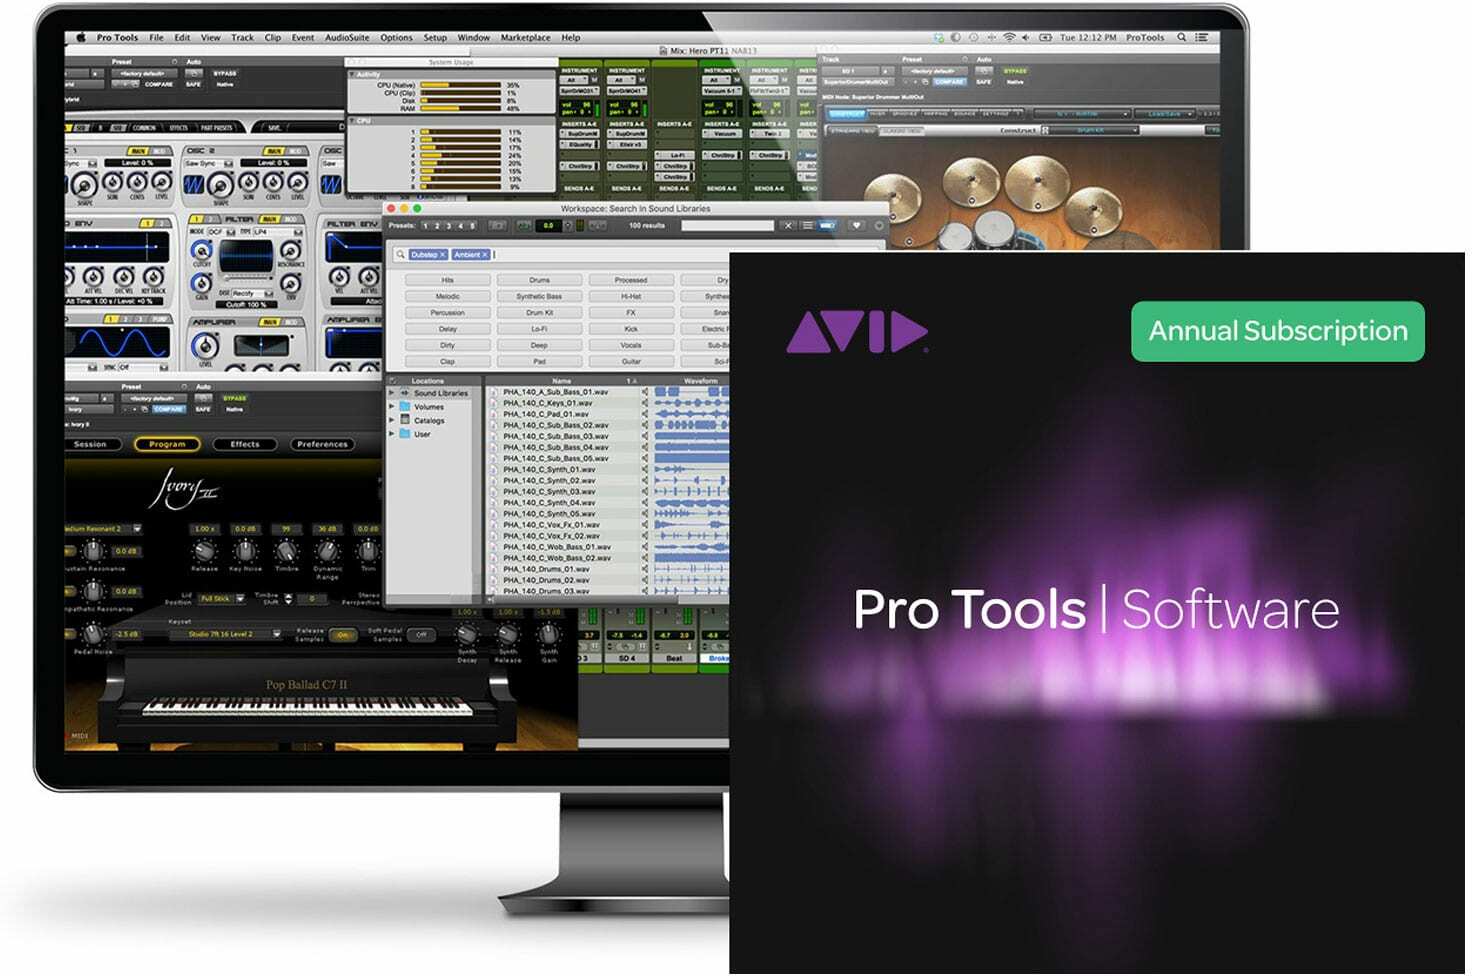 Avid Avid Pro Tools – Annual Subscription – Institutional - Protools avid software - Main picture